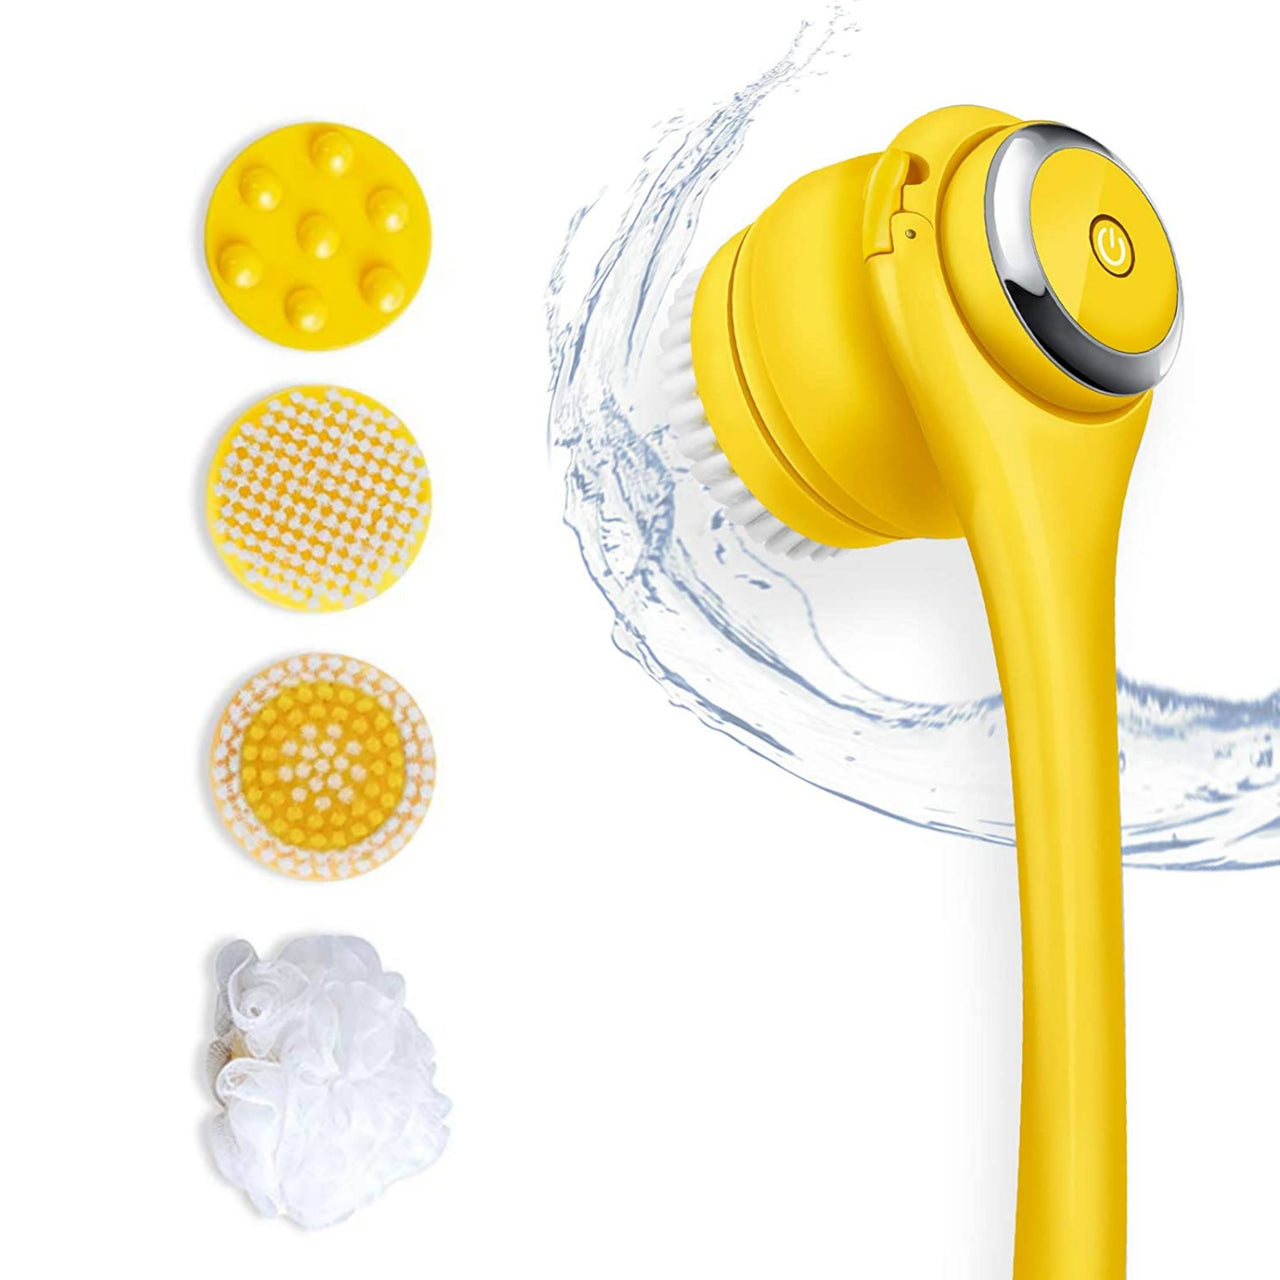 Wireless Waterproof Cleansing and Exfoliating Body Brush Set with 3 Speed 4 Brush Heads Yellow